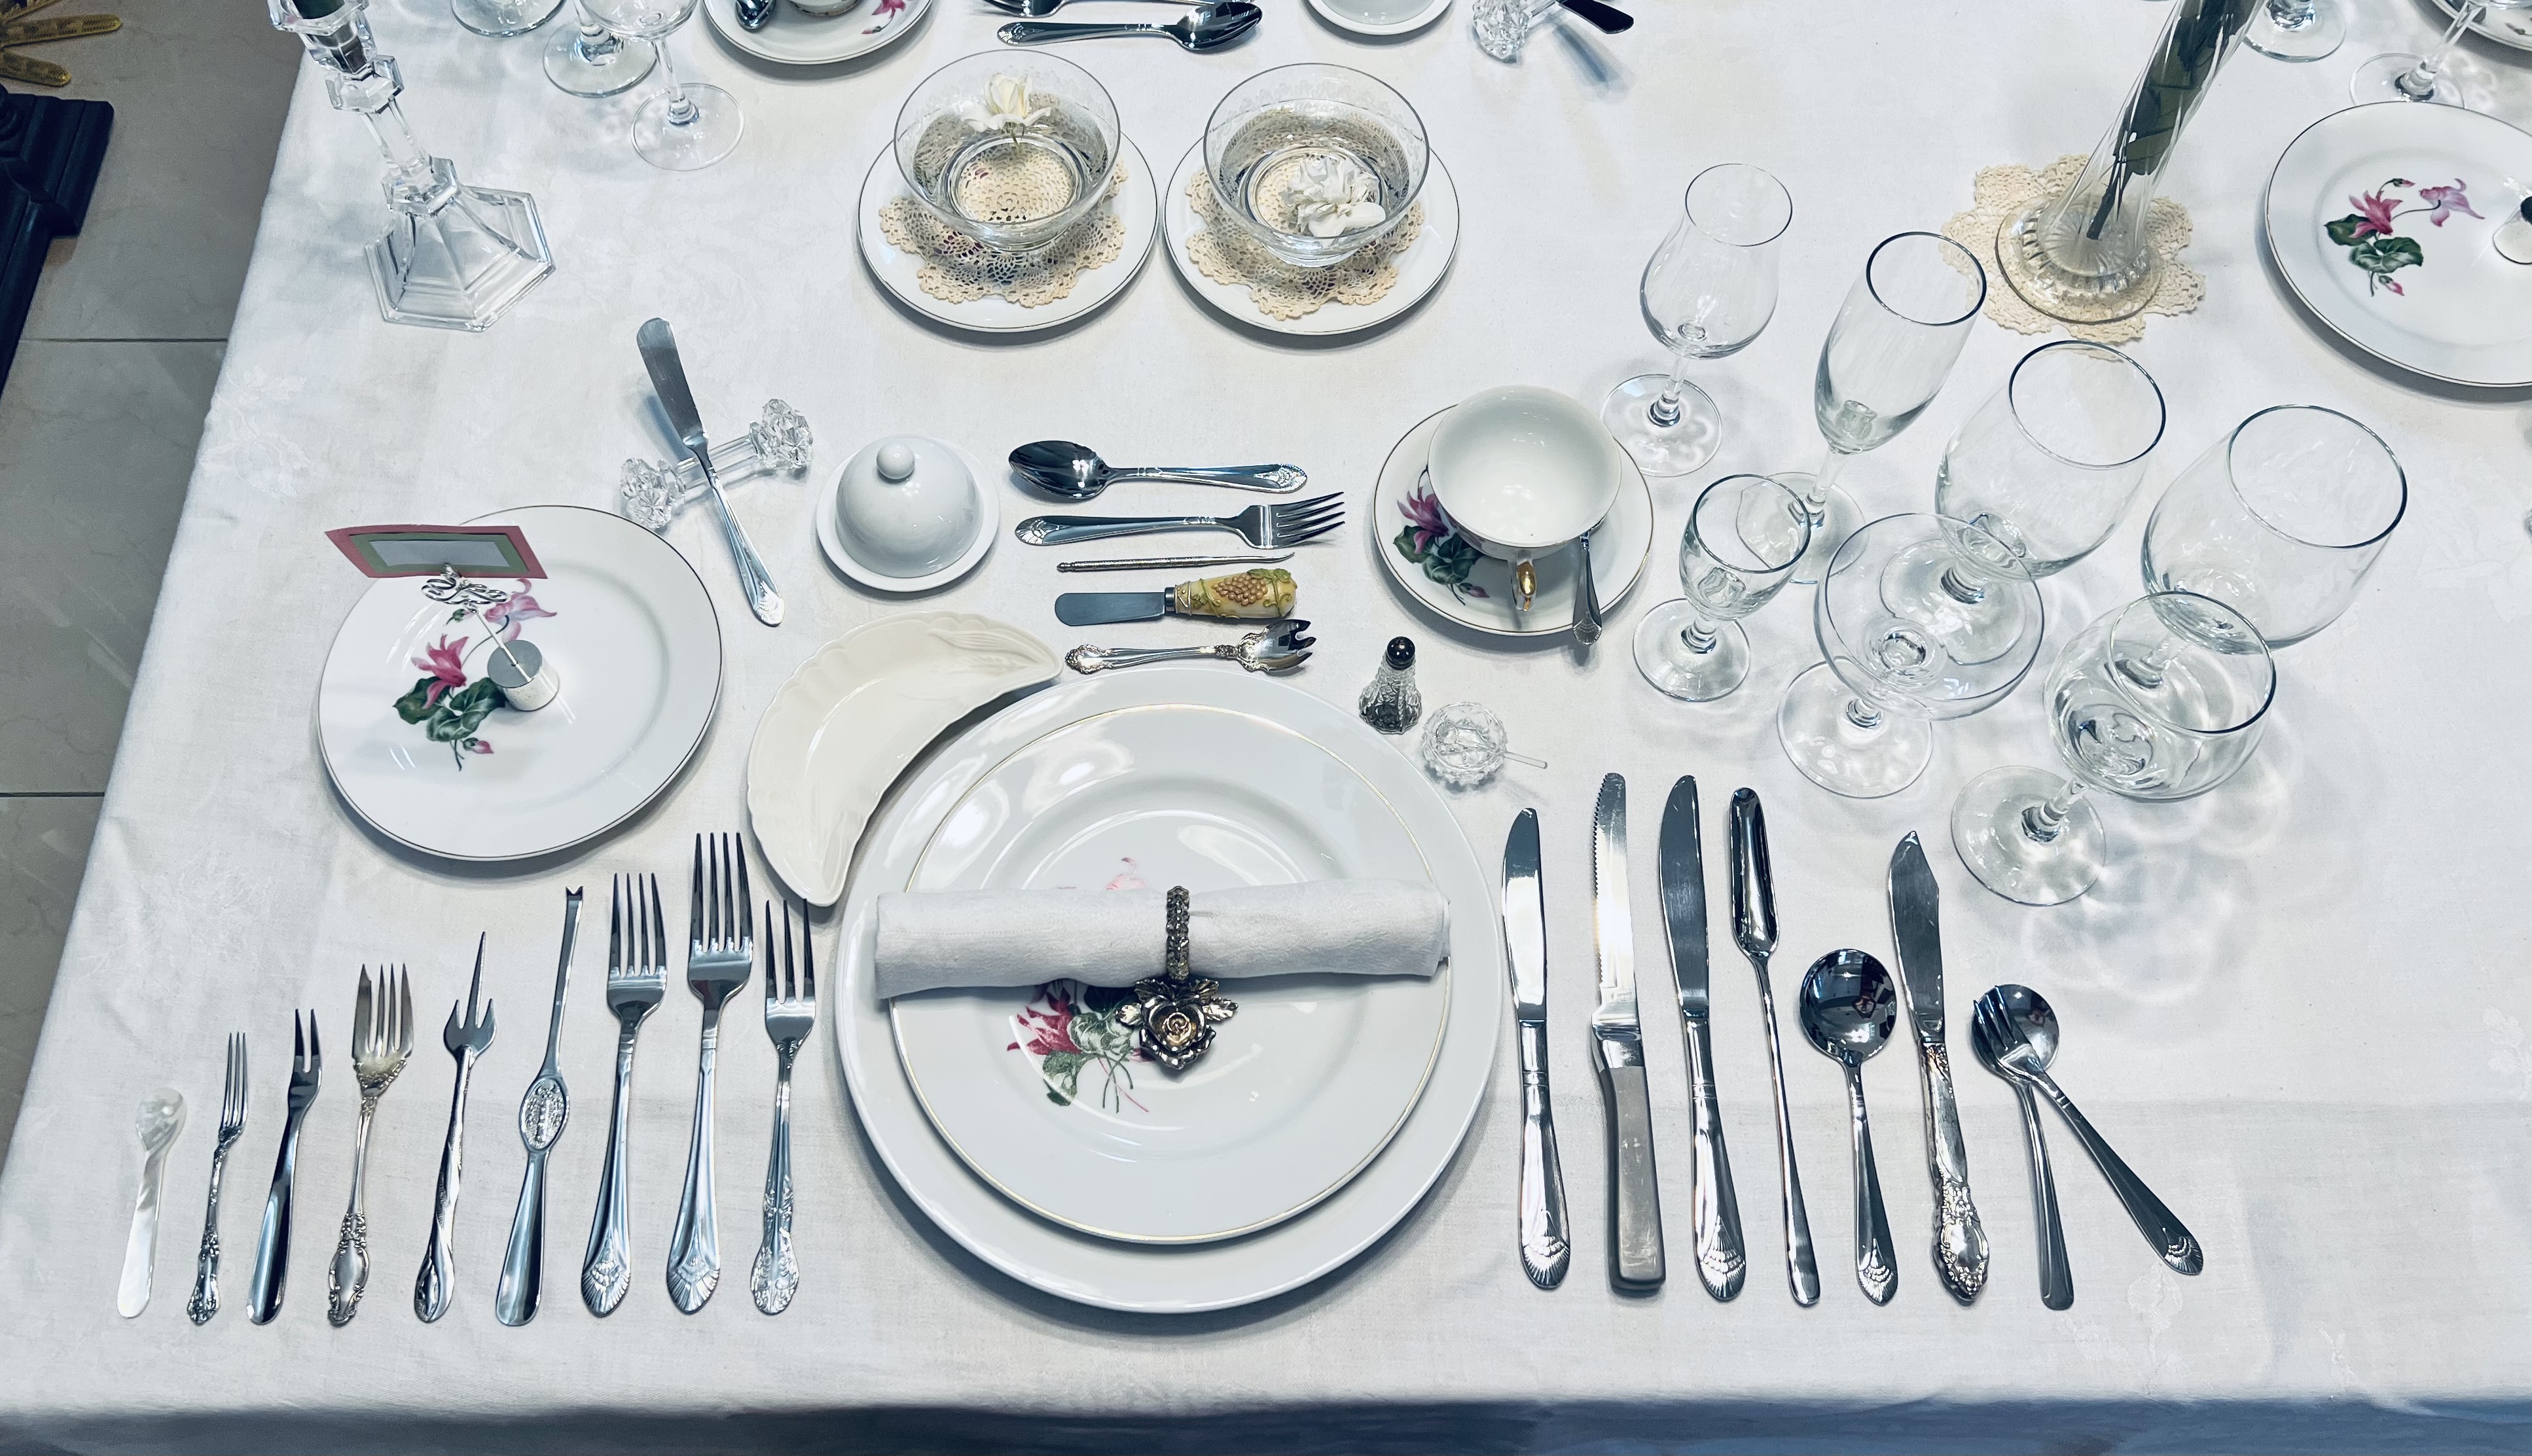 Table setting with multiple utensils